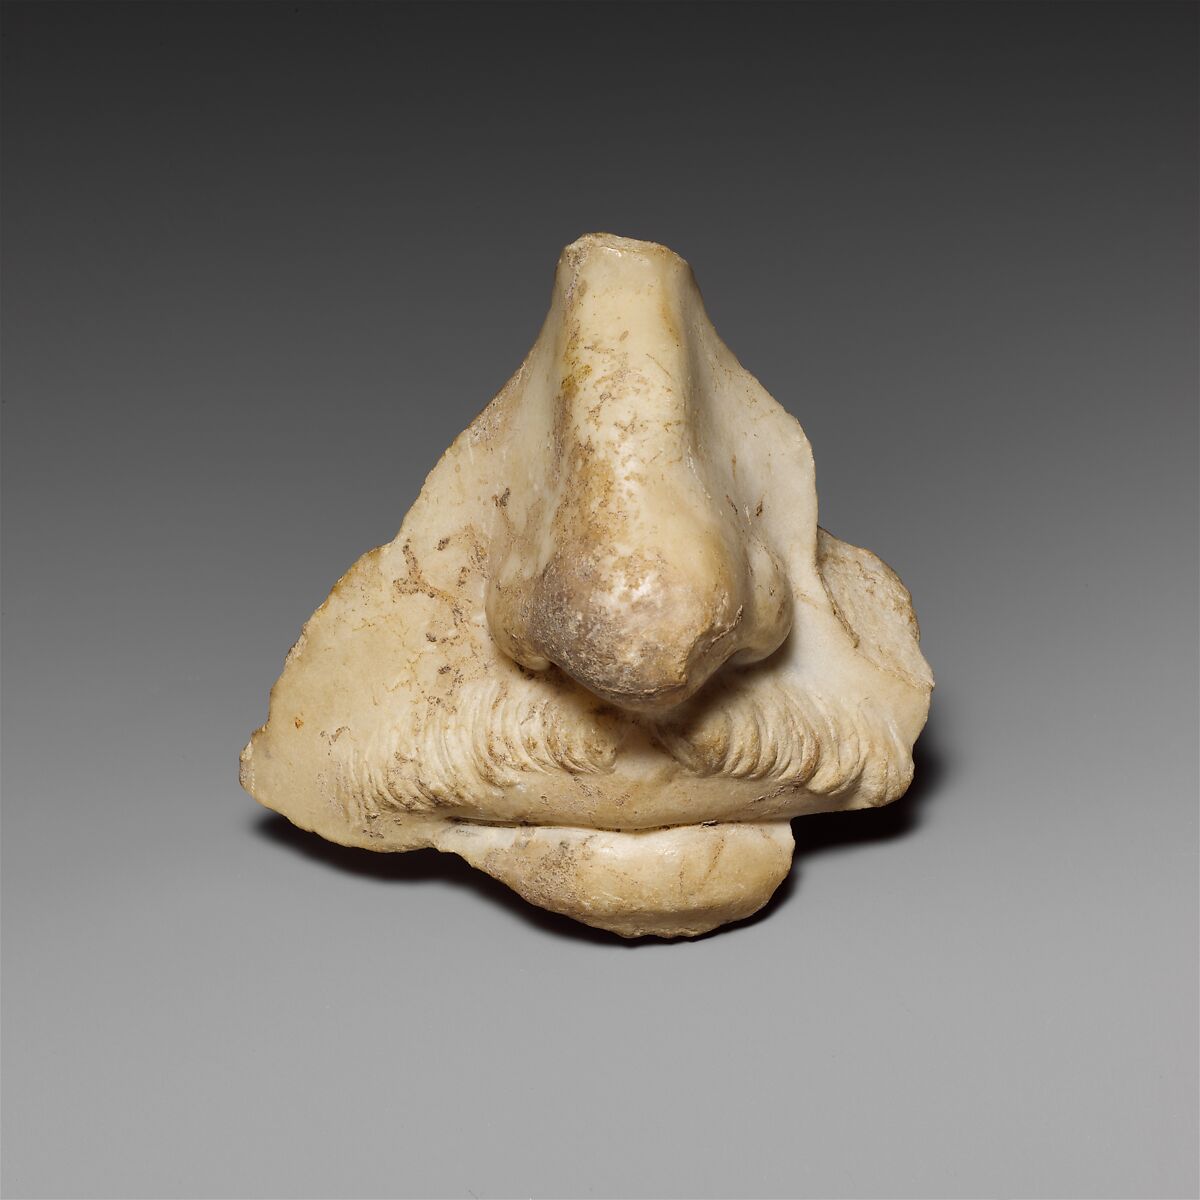 Fragment from a marble head of a man, preserving the nose and mouth